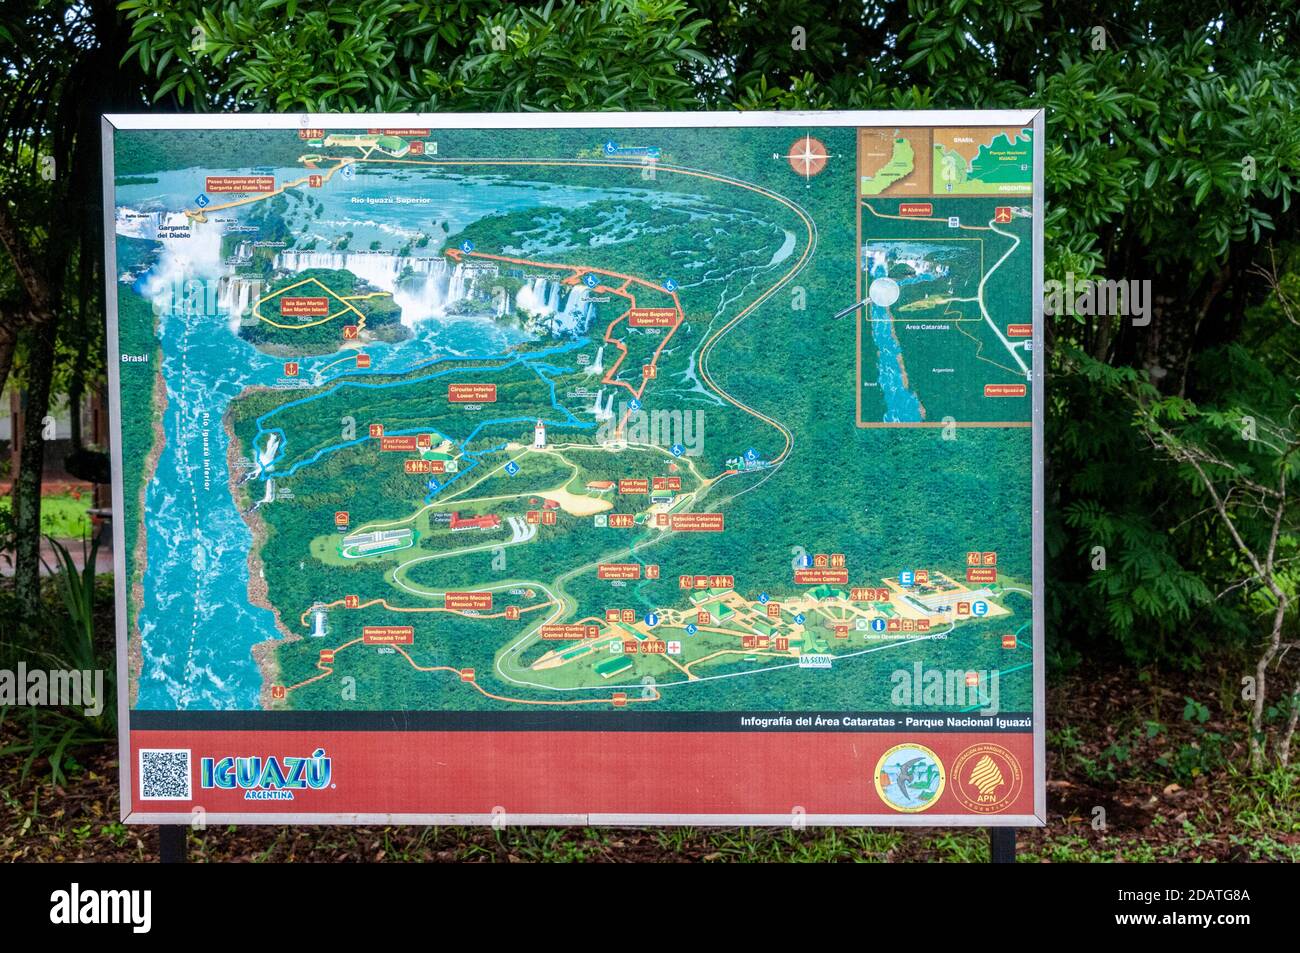 Large map of the waterfall locations and foot trails in the Iguazu National Park in Argentine.  The Iguazu Waterfalls is the biggest waterfall system Stock Photo